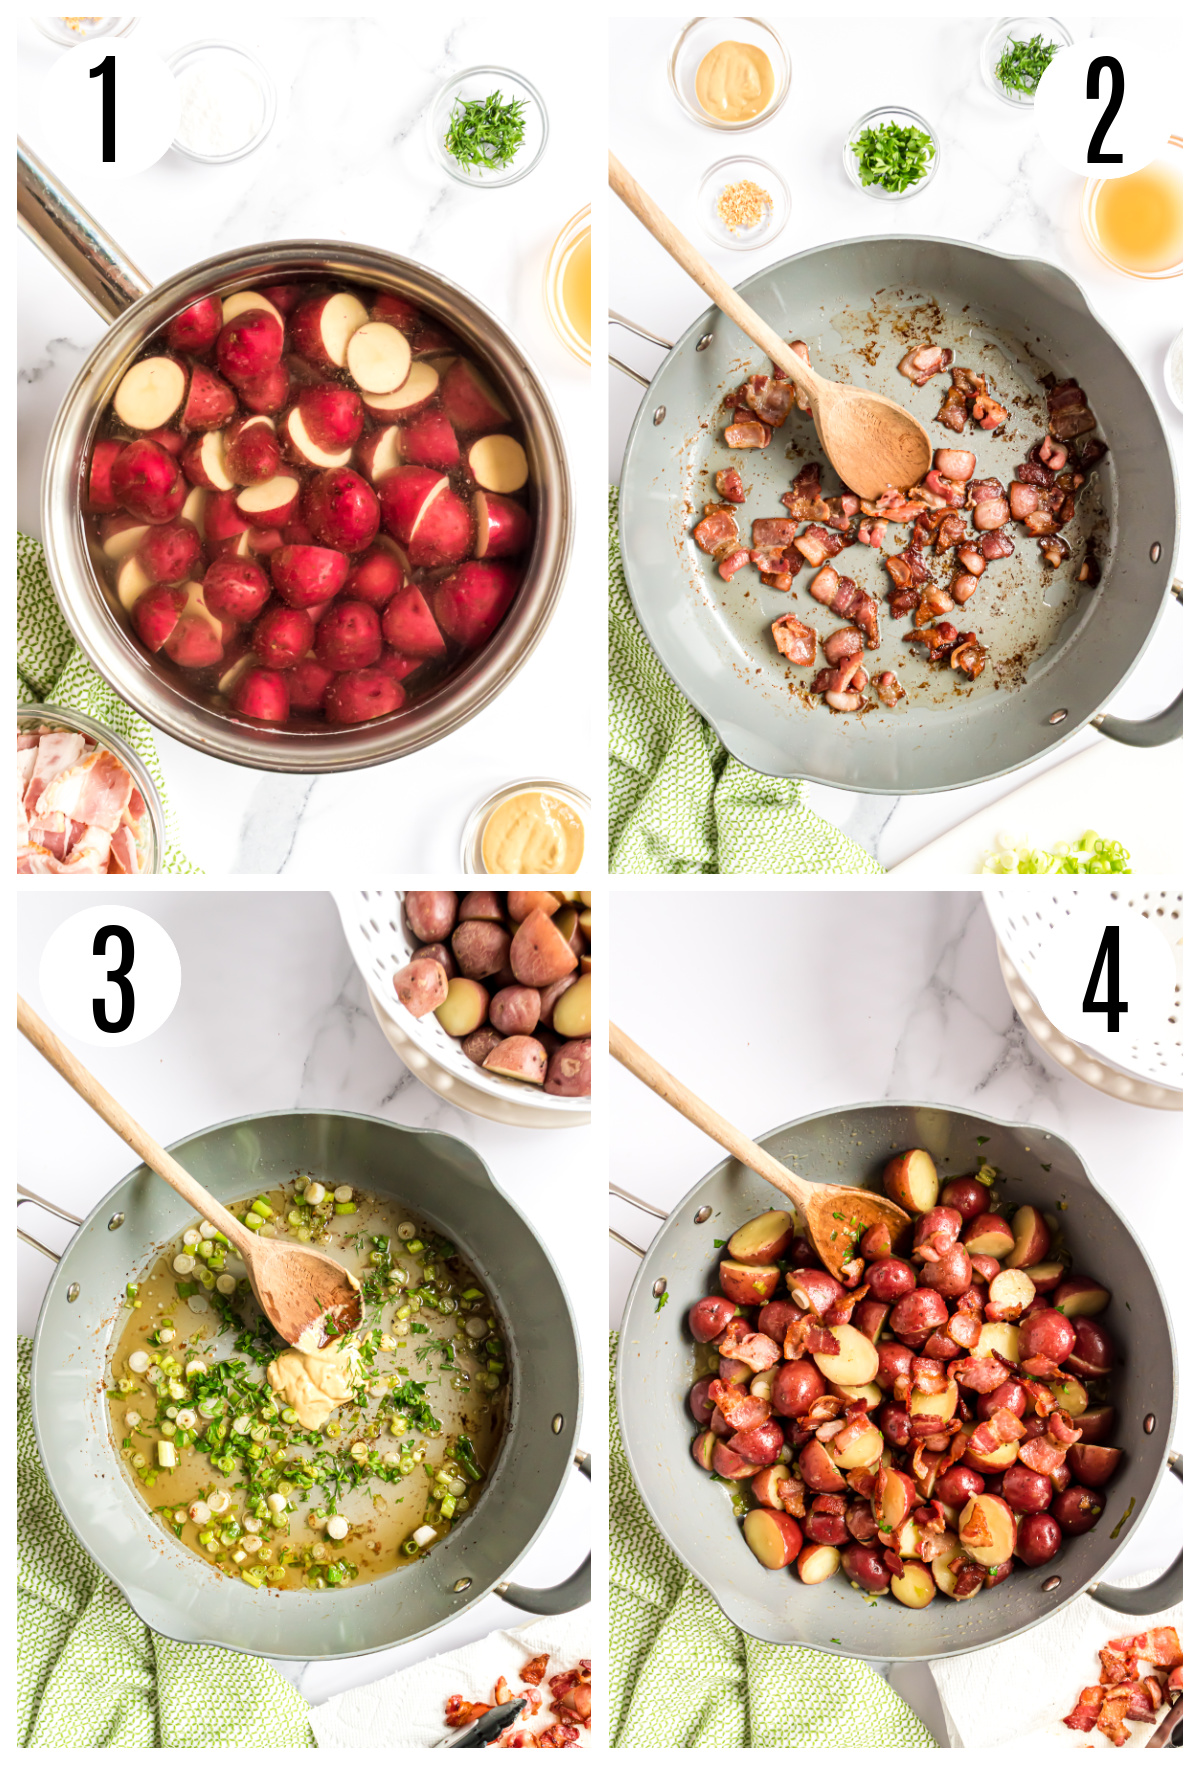 A collage of the 4 steps to make the hot potato salad including boiling the potatoes, frying the bacon pieces, adding the green onions to the pan, making the dressing, and tossing the cooked potatoes into the skillet to coat them.